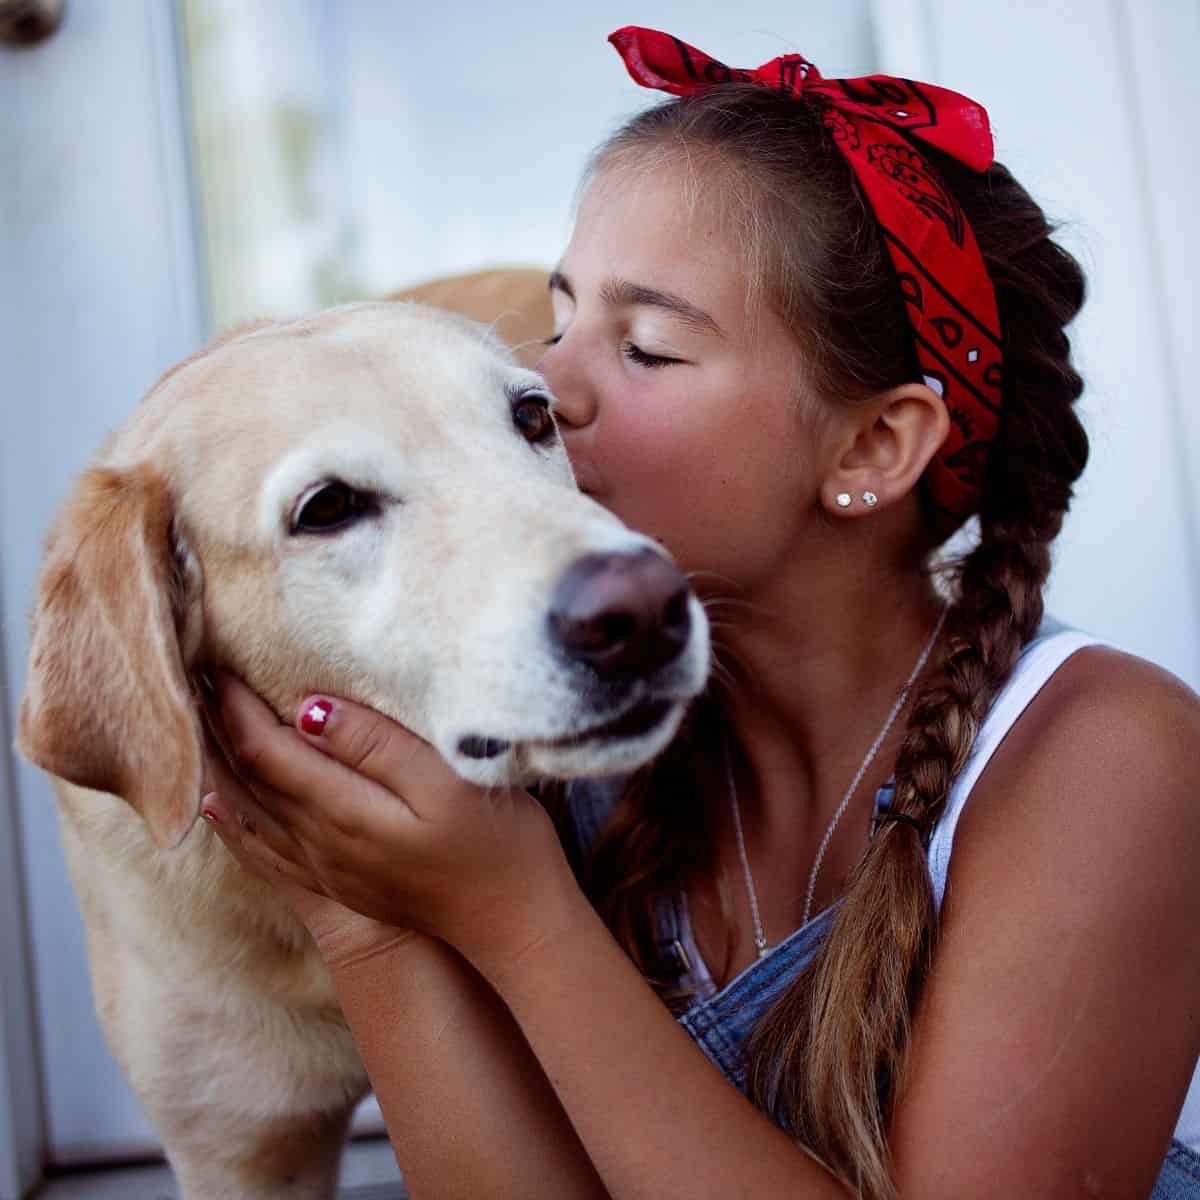 Blonde Labrador dog and a girl with long brown hair and a red hair tie hugging dog.